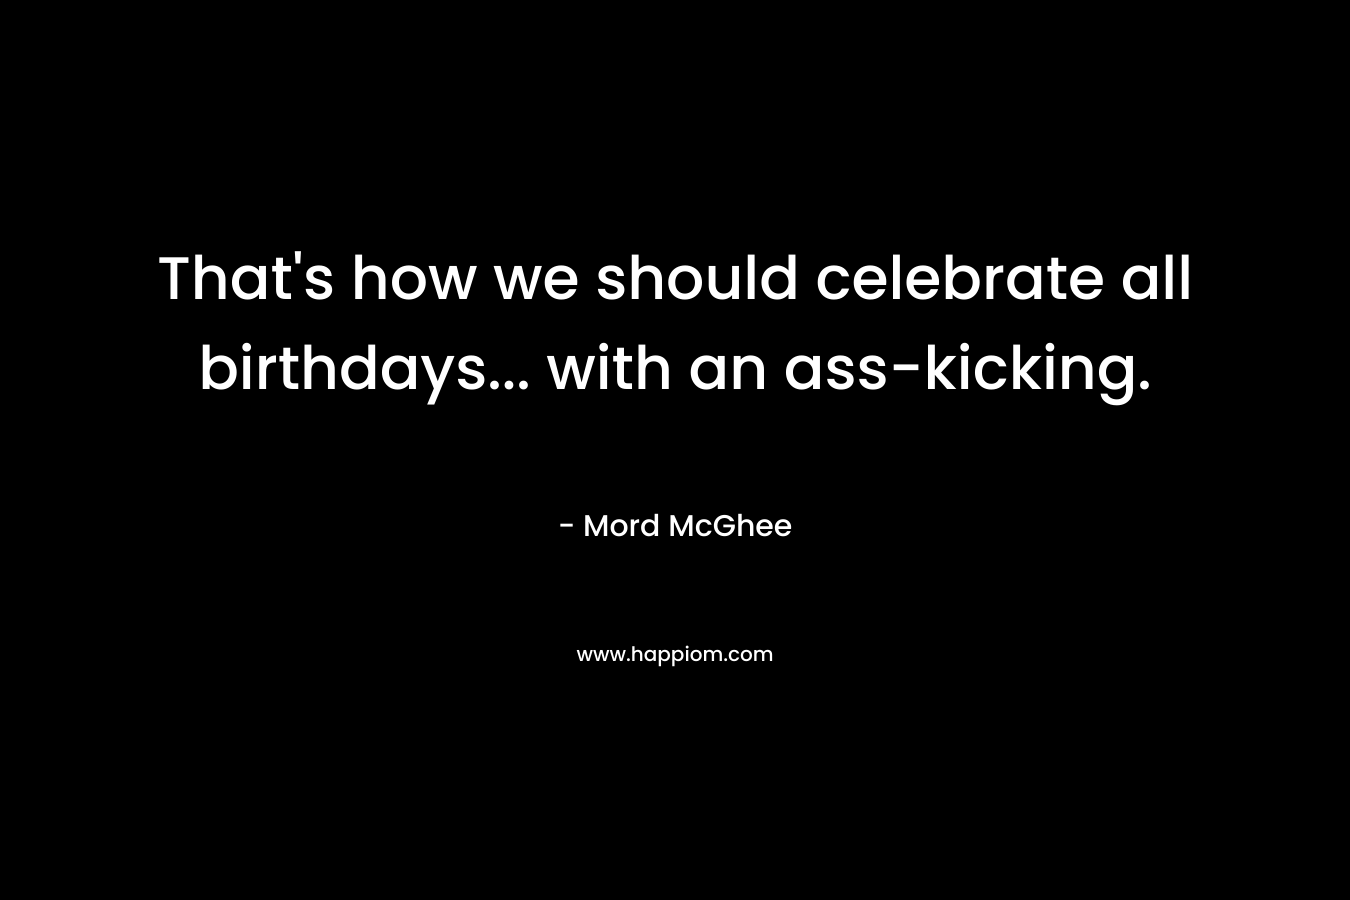 That's how we should celebrate all birthdays... with an ass-kicking.